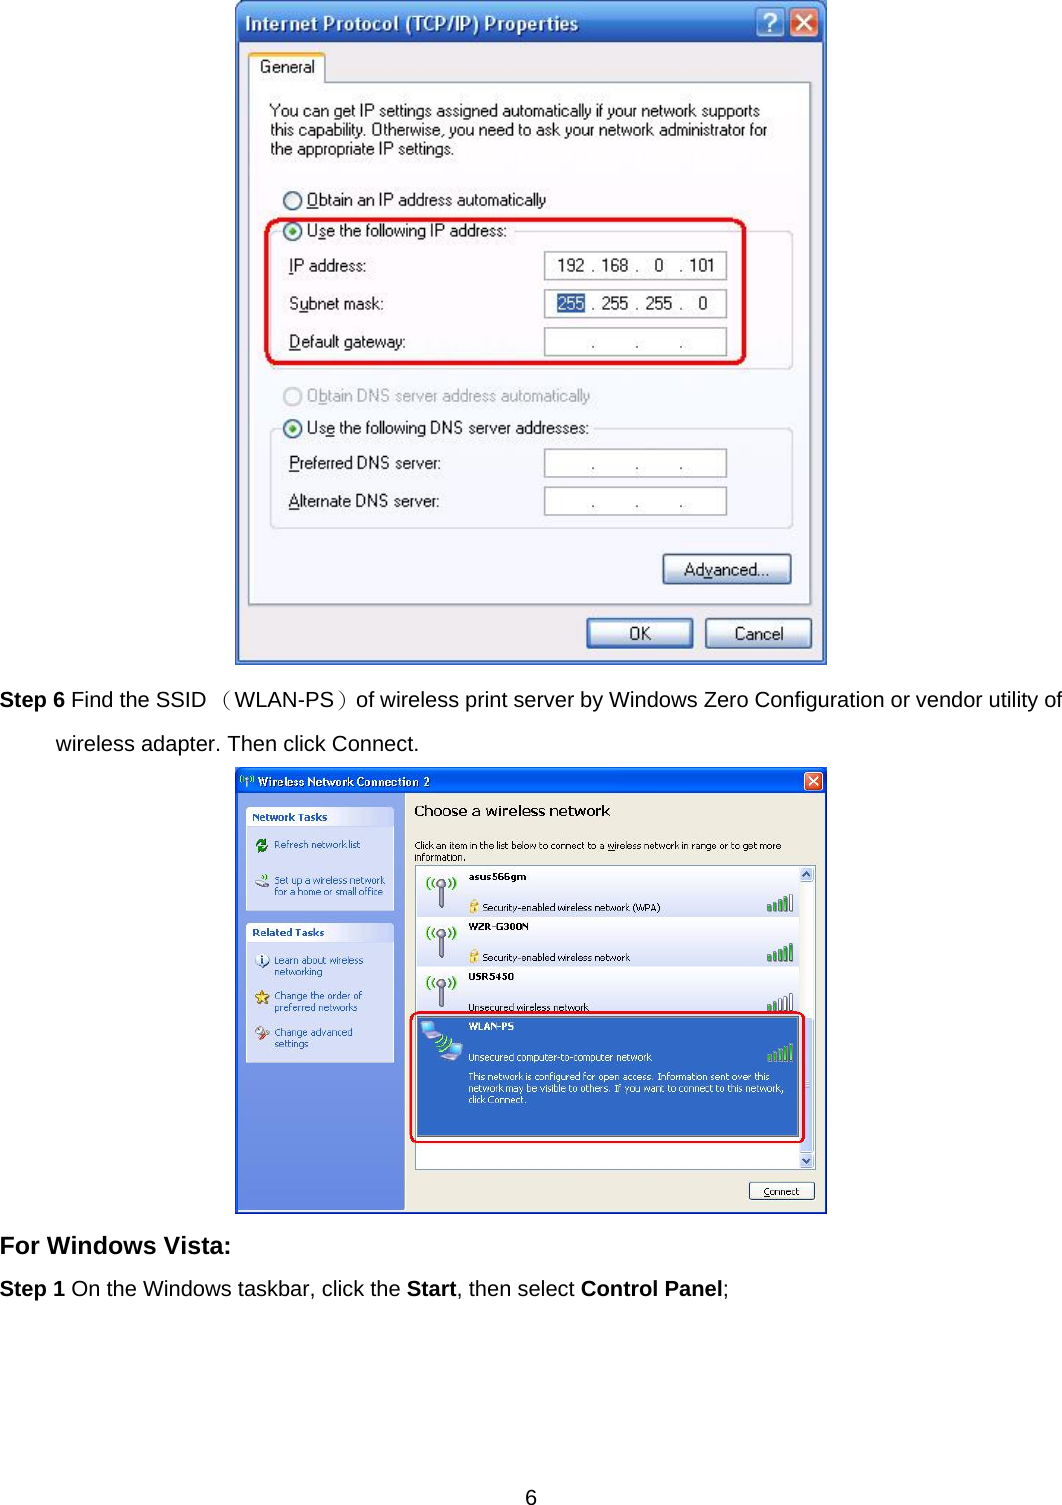  6   Step 6 Find the SSID （WLAN-PS）of wireless print server by Windows Zero Configuration or vendor utility of wireless adapter. Then click Connect.  For Windows Vista: Step 1 On the Windows taskbar, click the Start, then select Control Panel; 